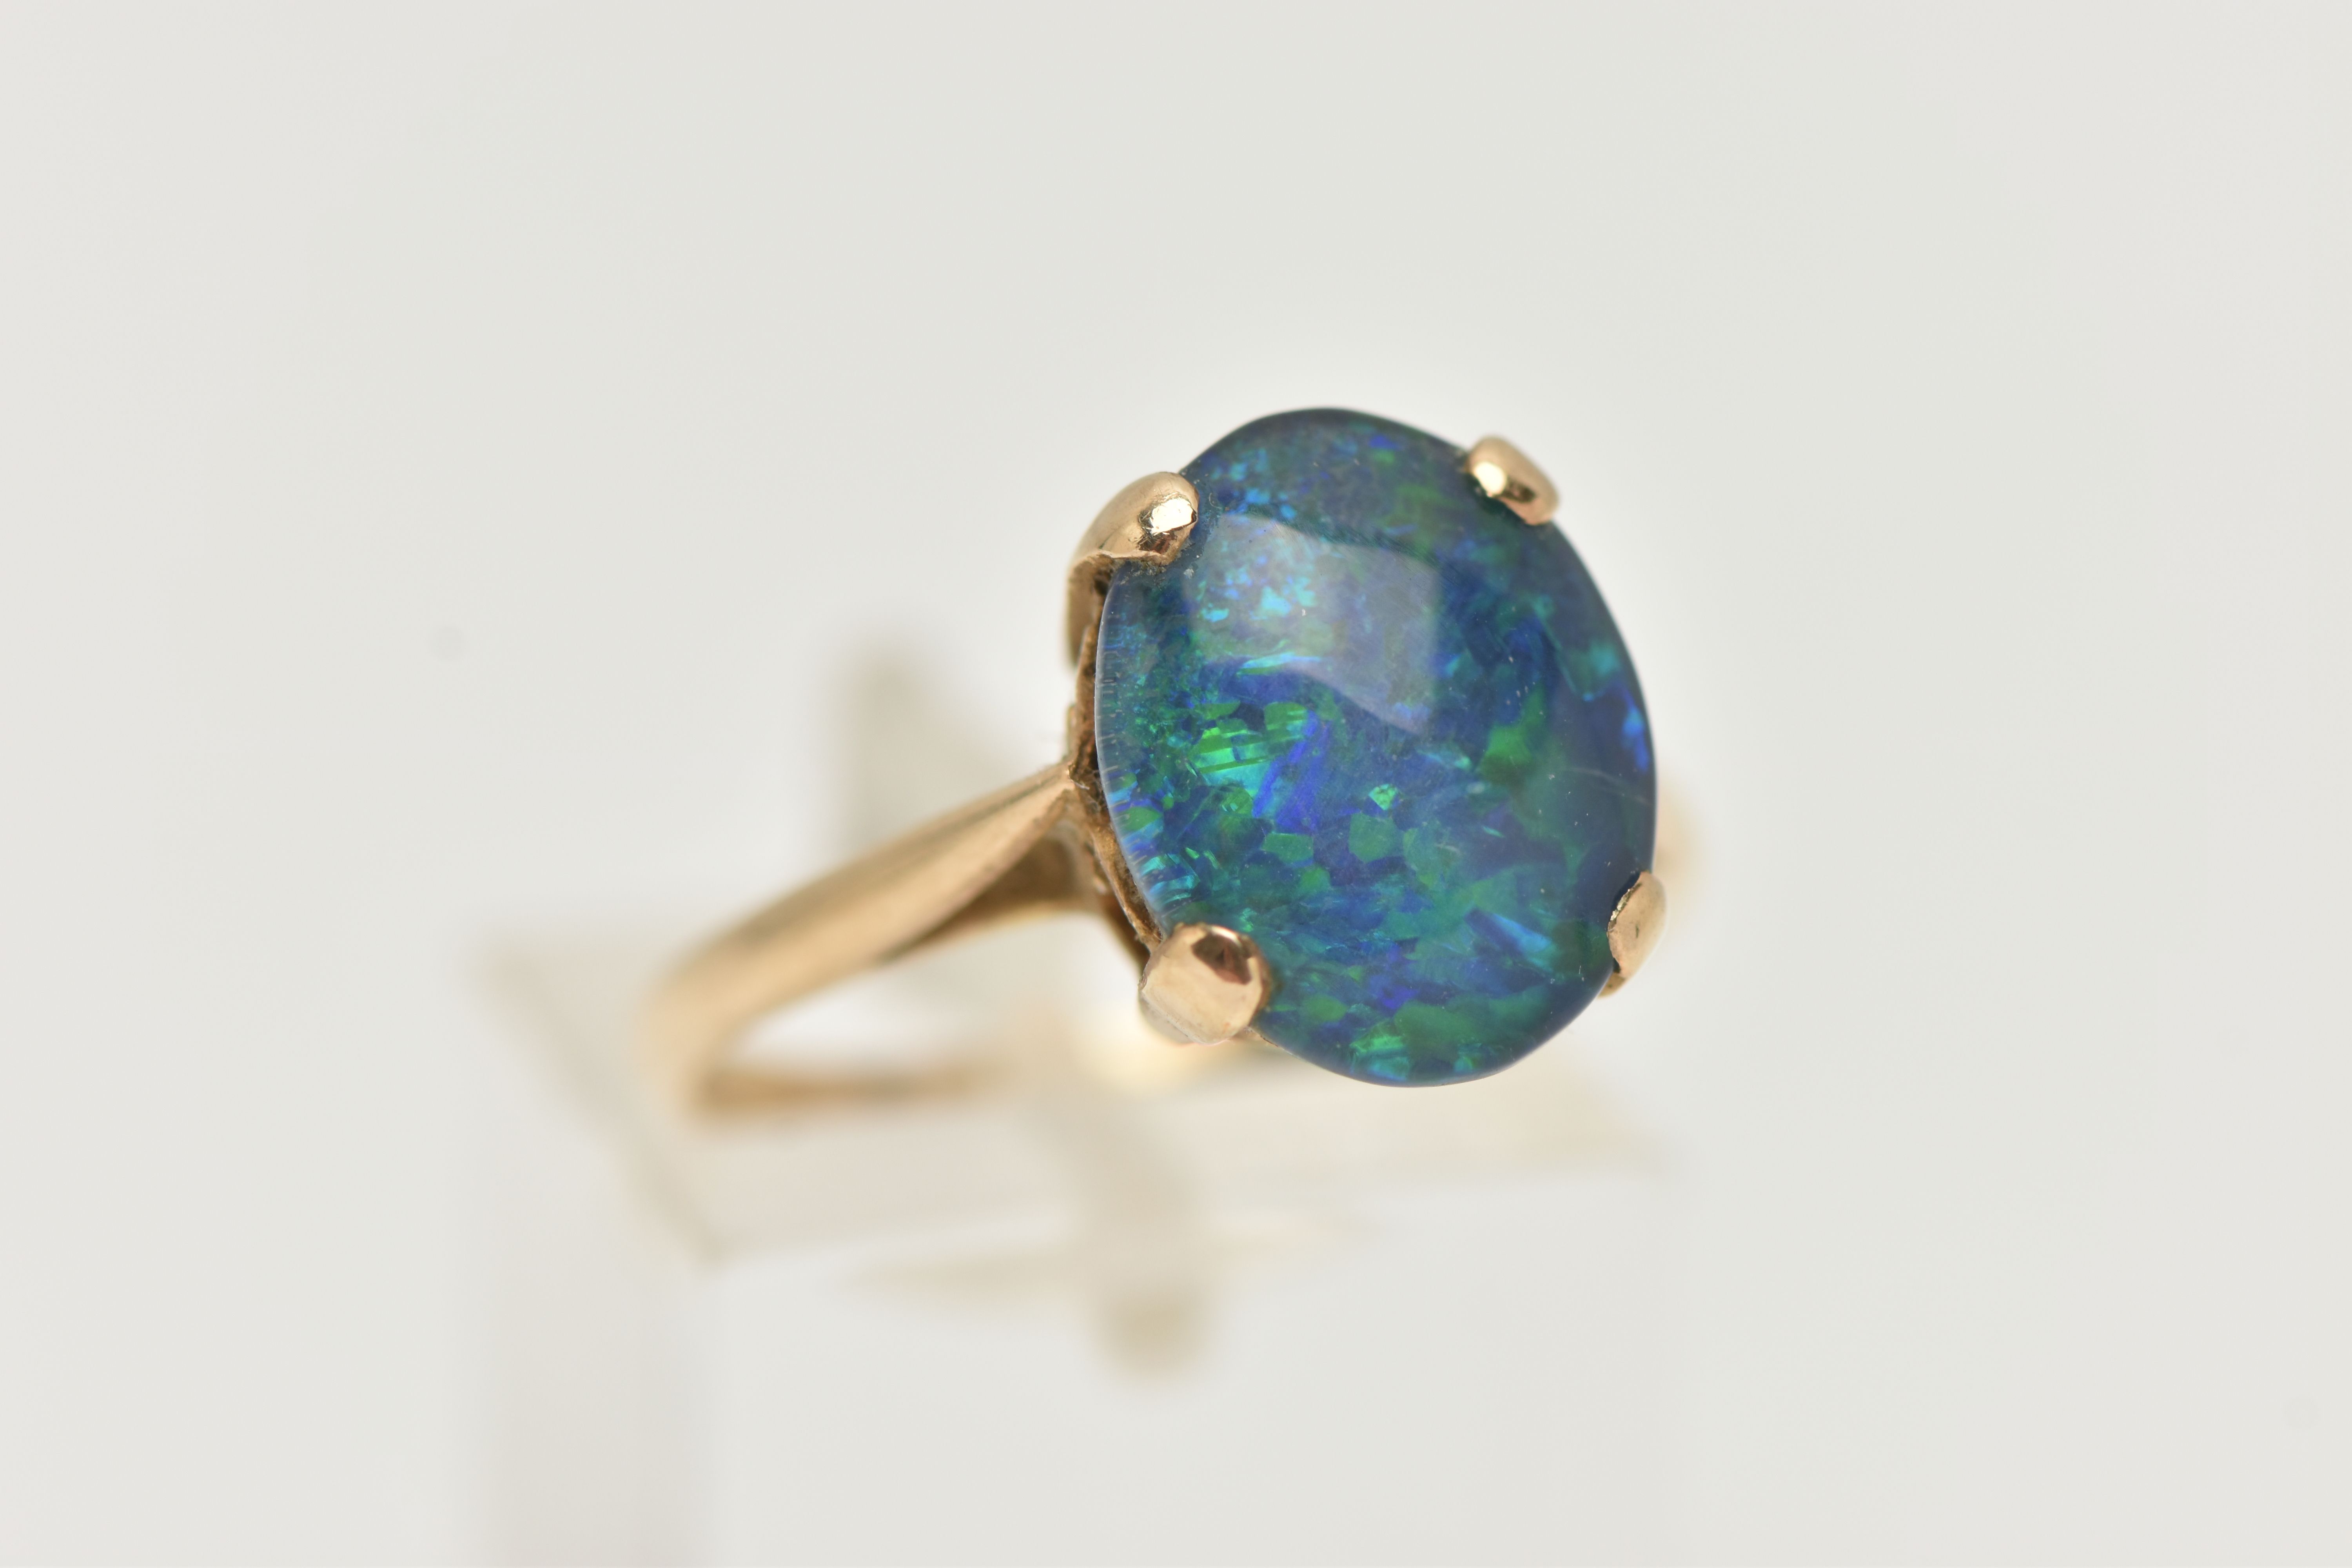 A 9CT GOLD OPAL TRIPLET RING, the oval opal triplet in a four claw setting to the plain band, 9ct - Image 4 of 4